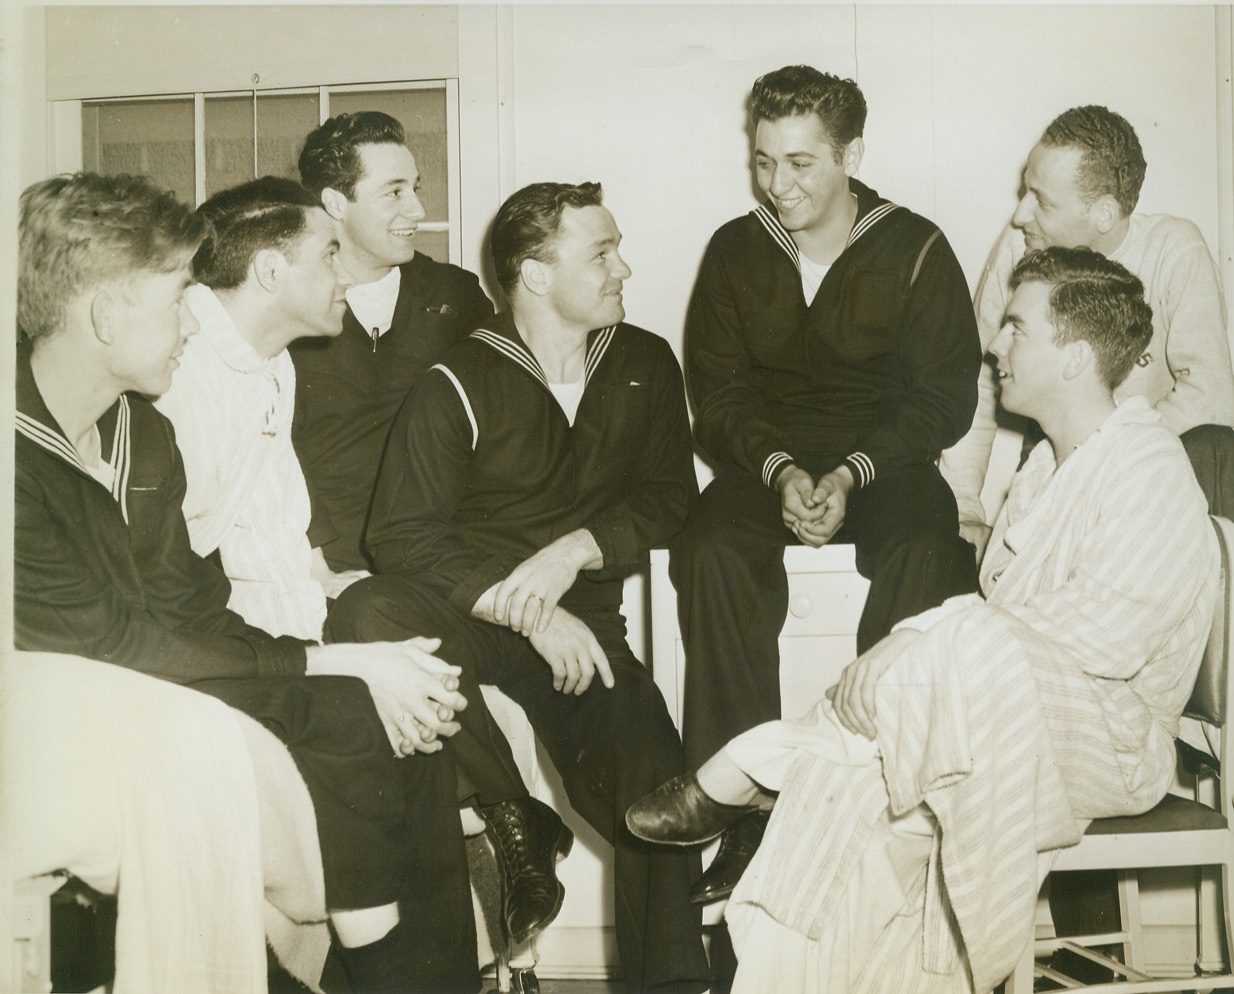 He Lives to Tell the Tale, 3/12/1943. Bethesda, MD.—Basil Izzi, of South Barry, Mass., who was one of the three survivors of five who drifted on a raft on the South Atlantic for 83 days, relates his experiences to fellow patients at the Naval Hospital here. Left to right: Dominic Hutchison, Mims, Fla.; Emil Heifitz, Cleveland, Ohio; Joseph Castelluci, Somerville, Mass.; Joseph Marinko, St. Louis, MO.; Izzi; Al Silver, Baltimore; and Ed Parker, Richmond, VA. Credit: ACME.;